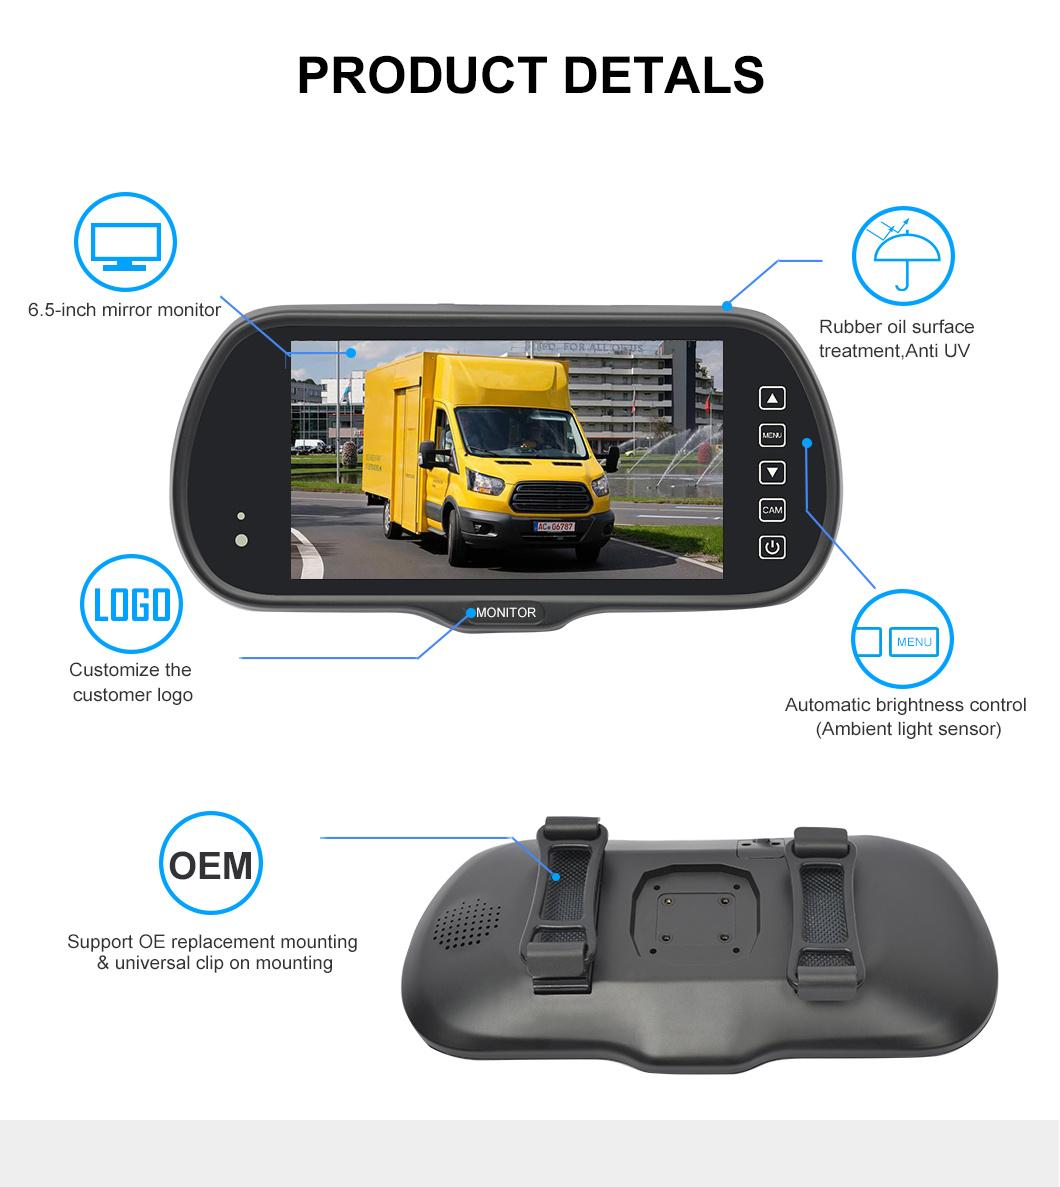 720p LCD 6.5 Inch Backup Rearview Camera Monitor Kit with Window Glass Mount